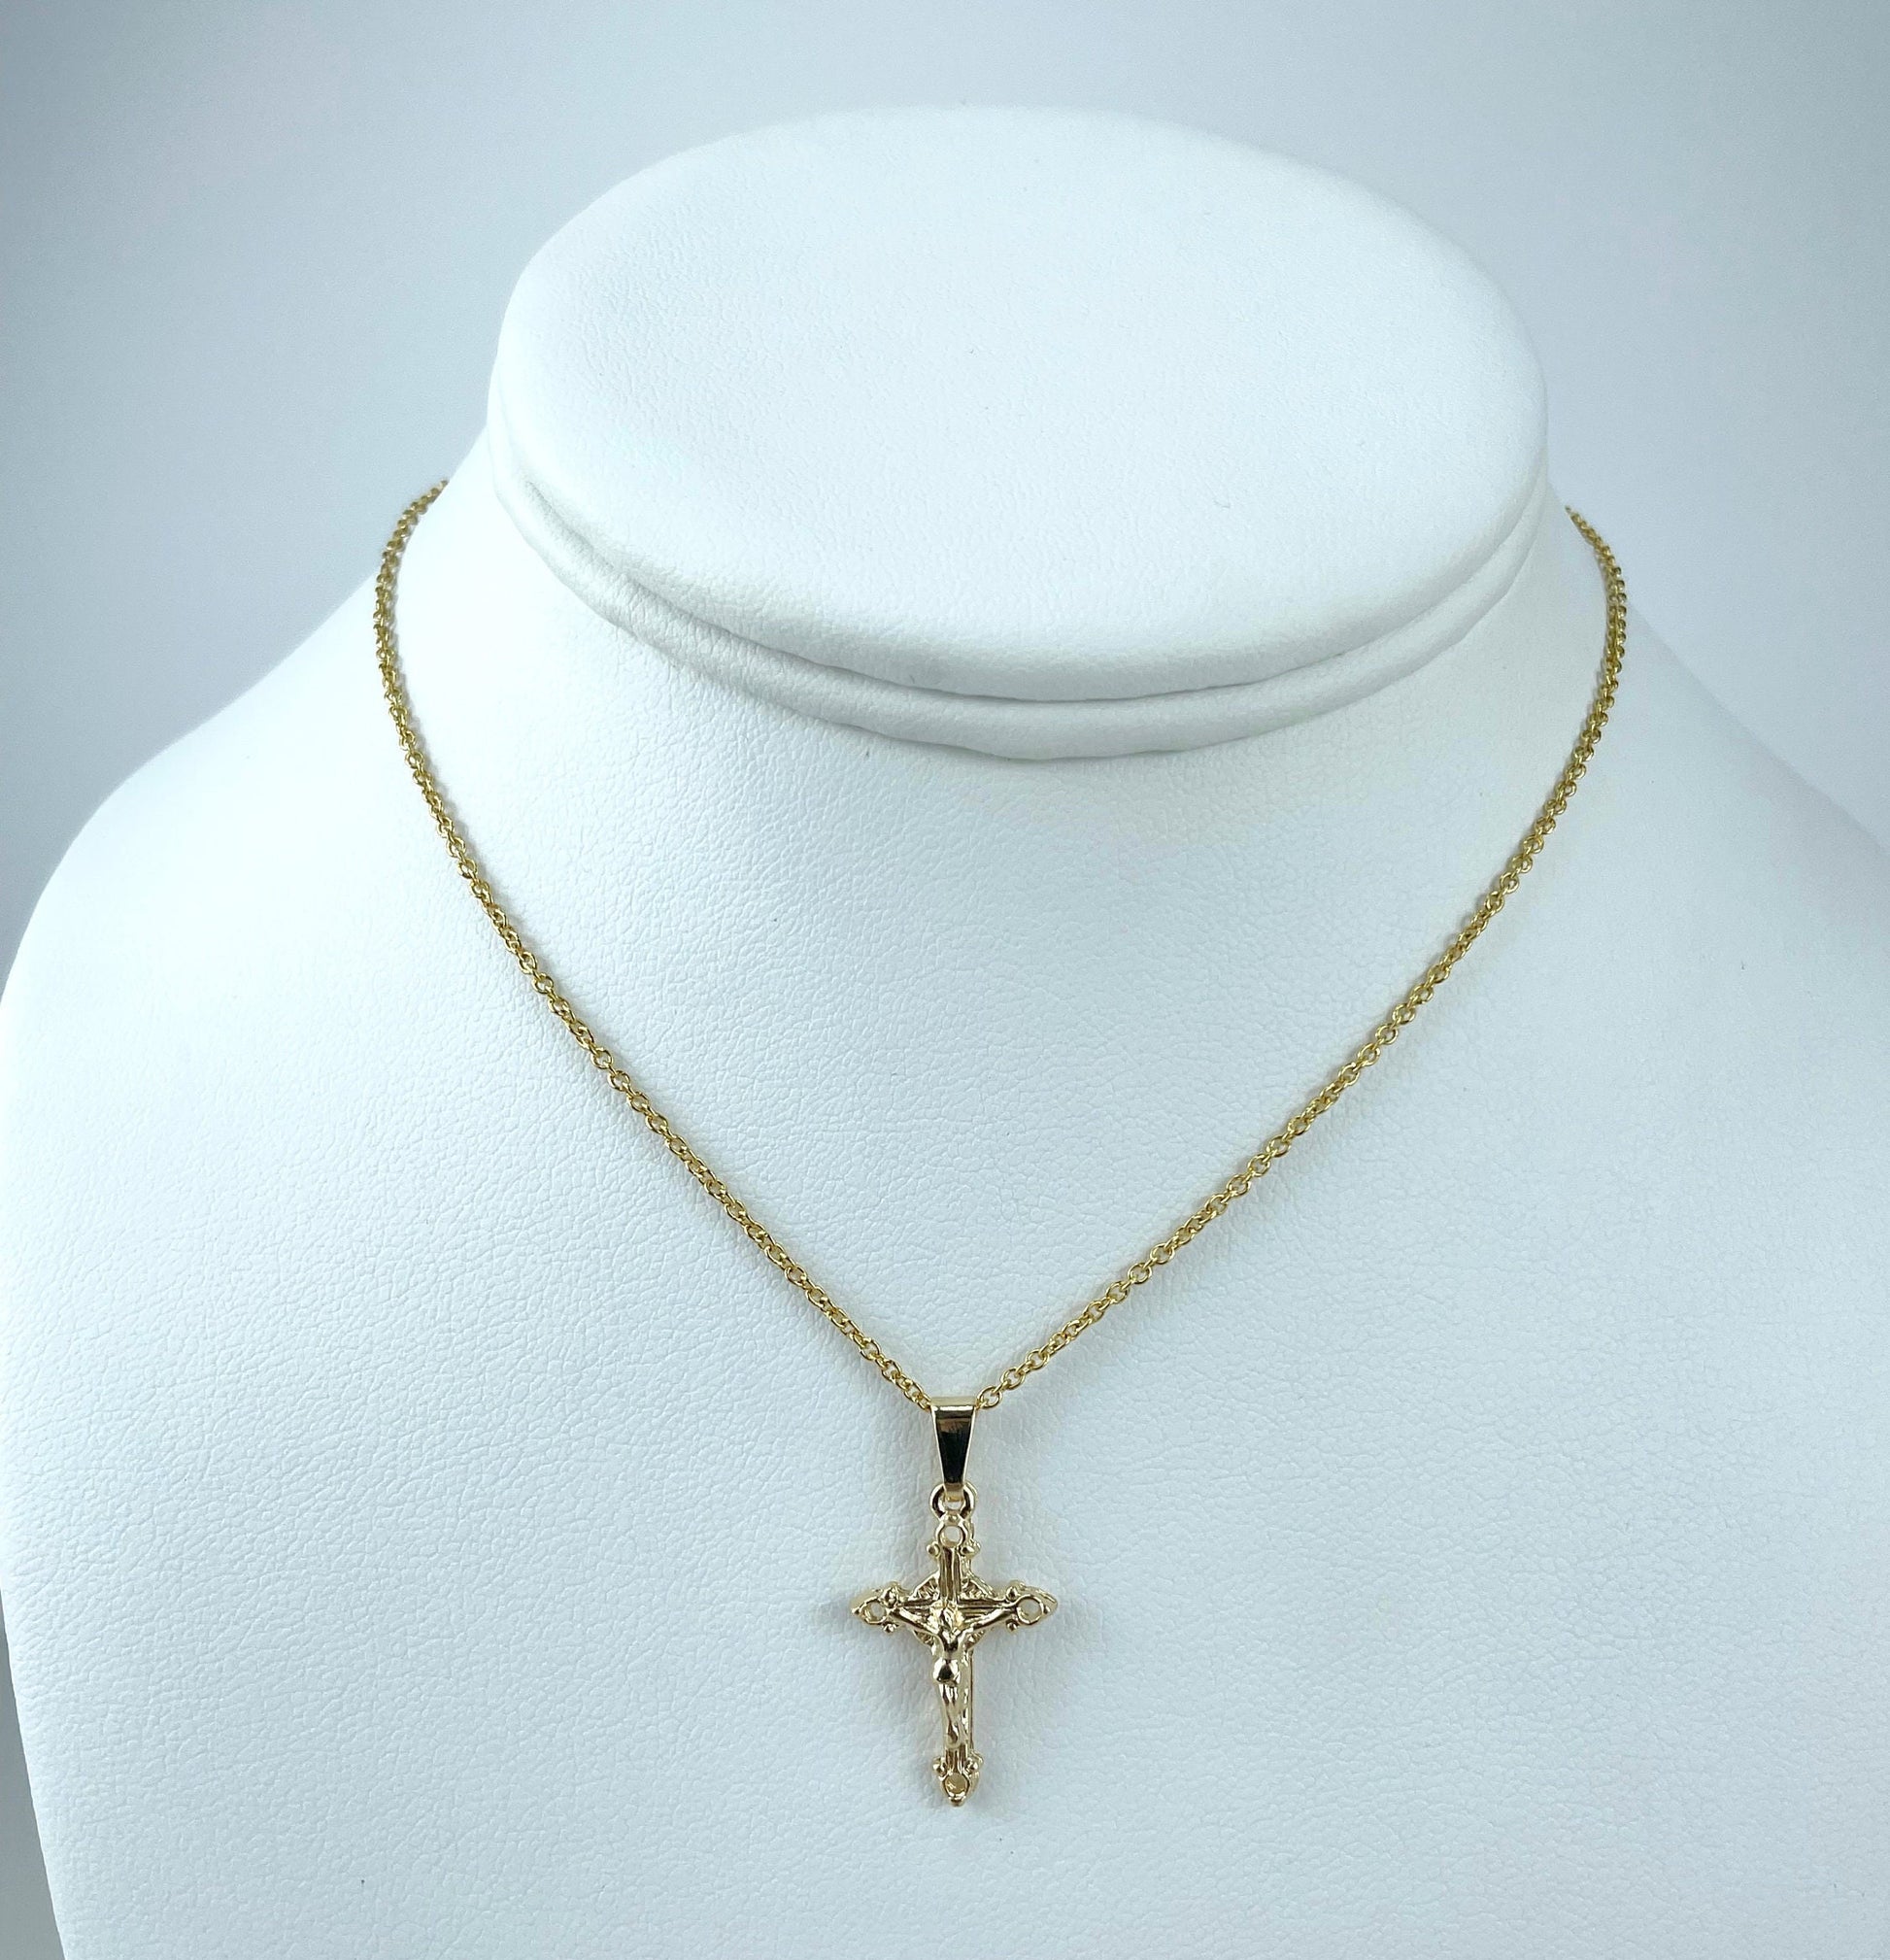 18k Gold Filled Ankh, Crucifix or Cubic Zirconia Cross Charms Pendant, Wholesale Jewelry Making Supplies